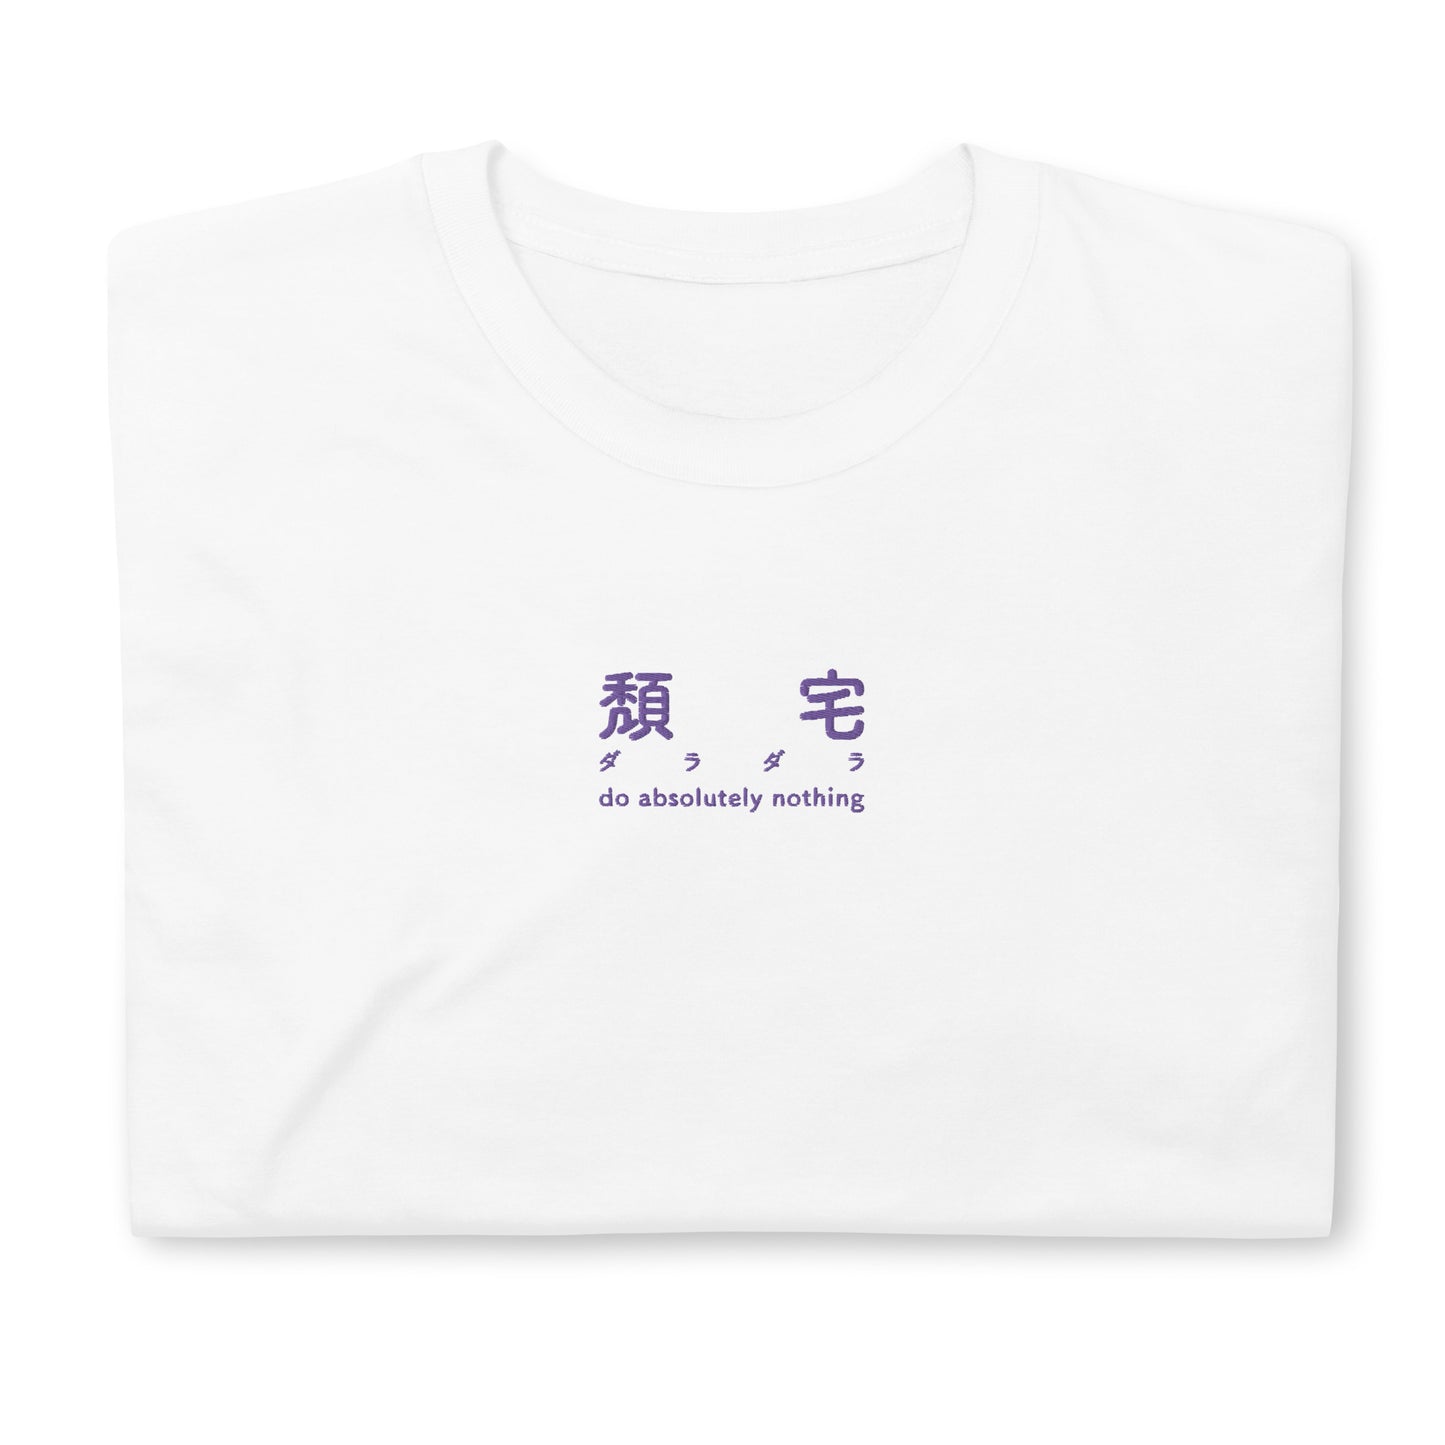 White High Quality Tee - Front Design with an Purple Embroidery "do absolutely nothing" in three languages